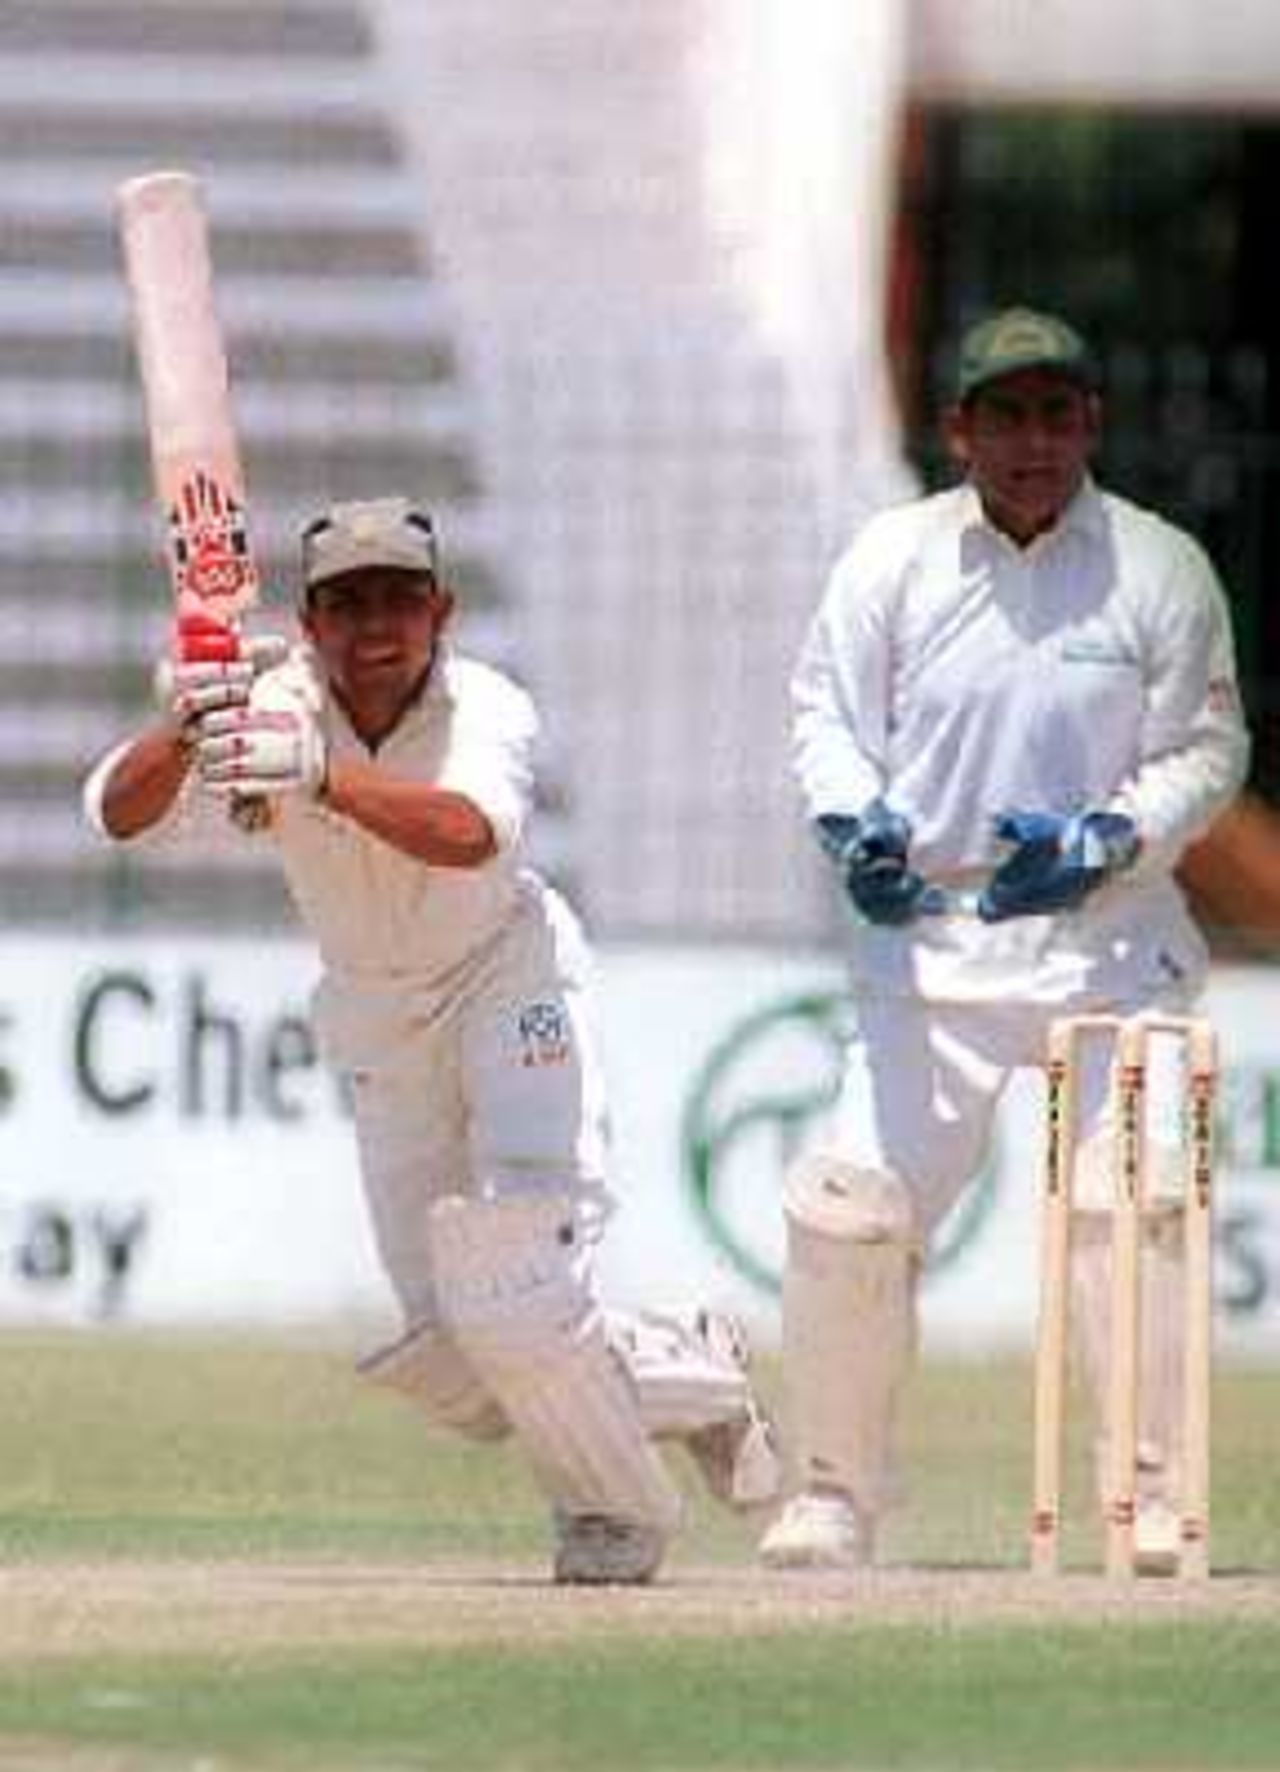 Kamal Akmal of NBP plays an on-drive against Habib Bank during the final round match at the Gaddafi Stadium, Lahore. 6 April 2000.